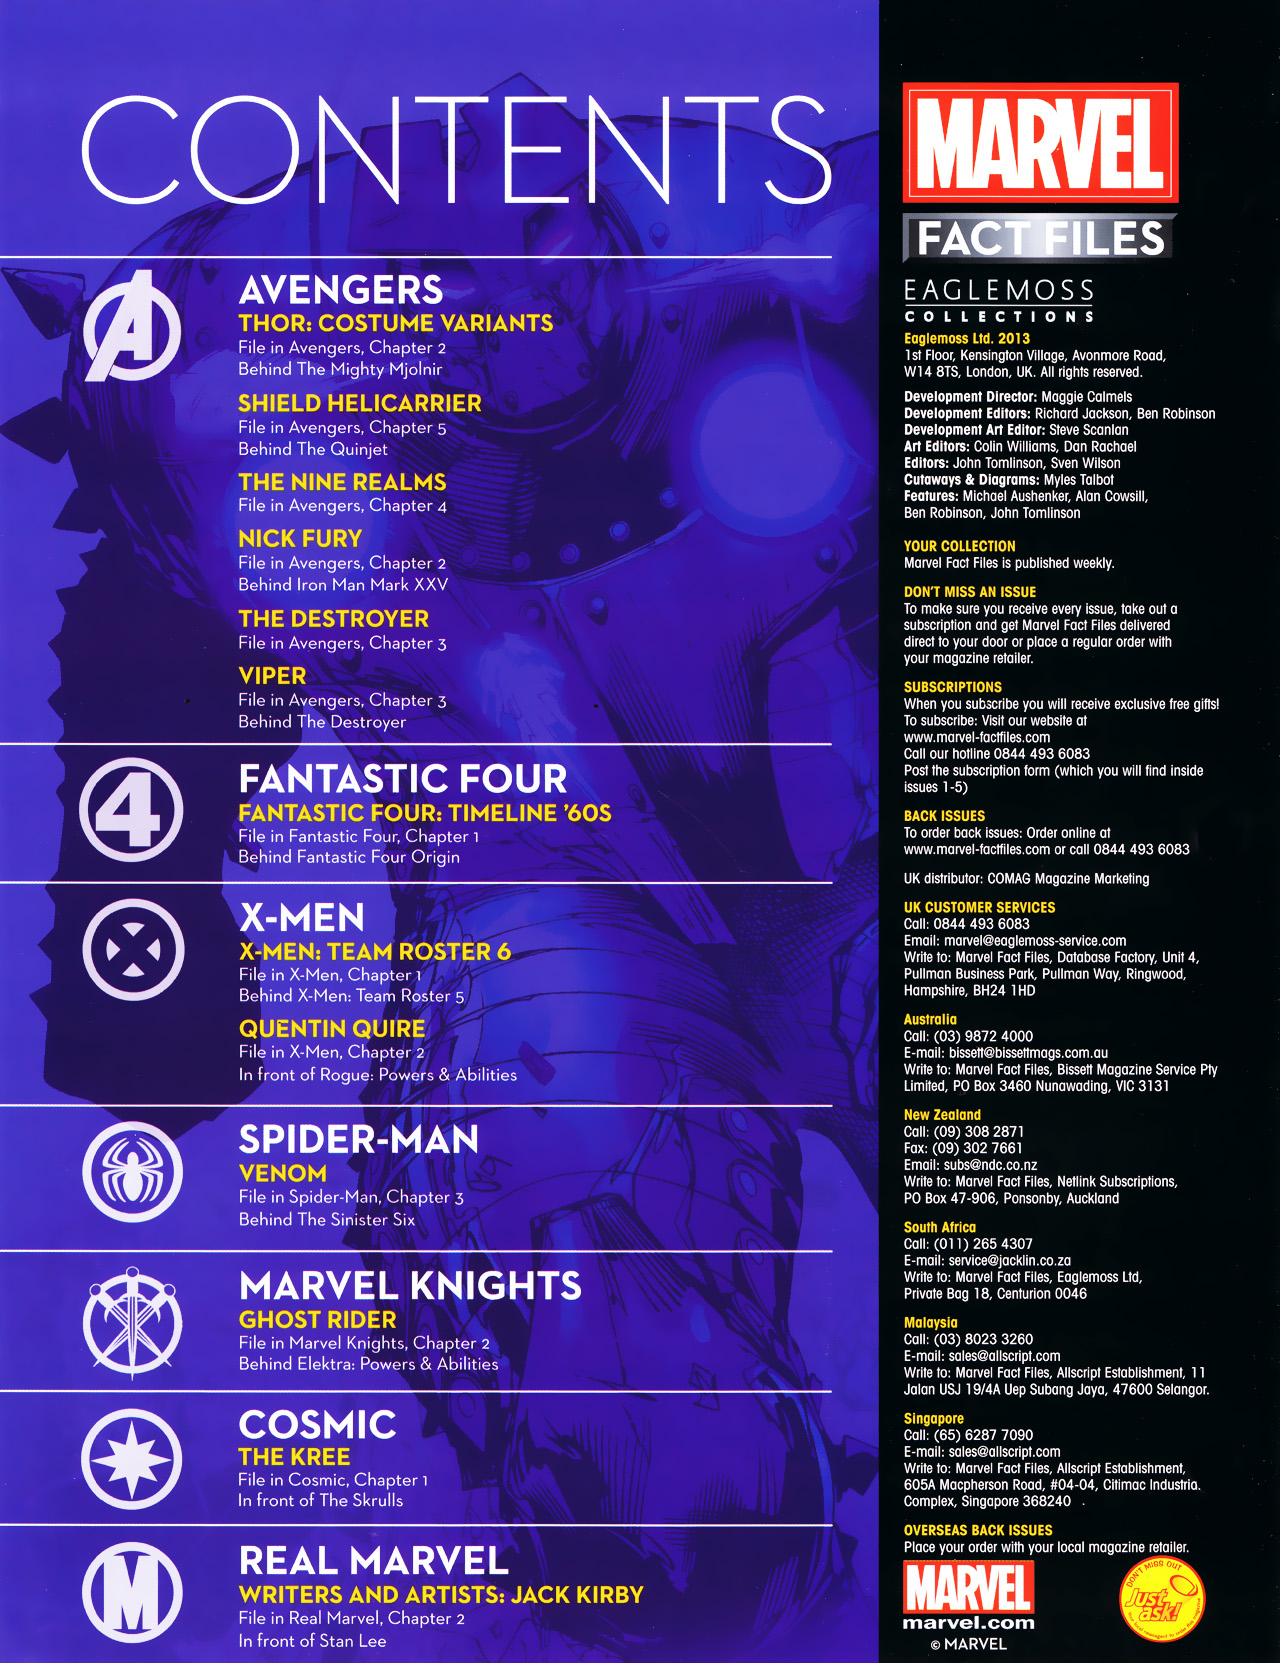 Read online Marvel Fact Files comic -  Issue #6 - 2